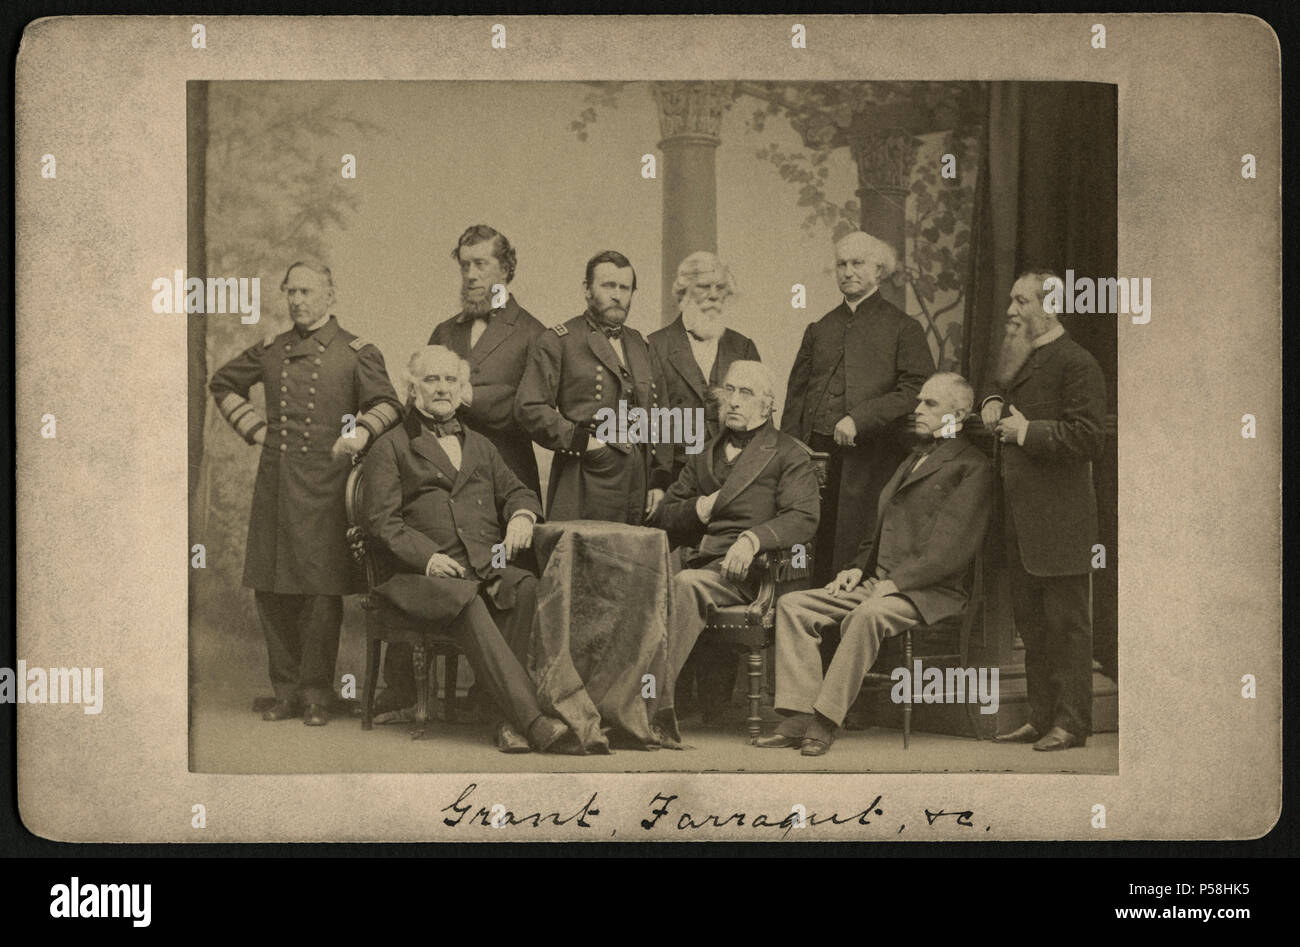 David Farragut (standing left), Ulysses S. Grant (standing center), George Peabody (seated left) with other Union Officers and Statesmen after the end of the American Civil War, Portrait, 1865 Stock Photo